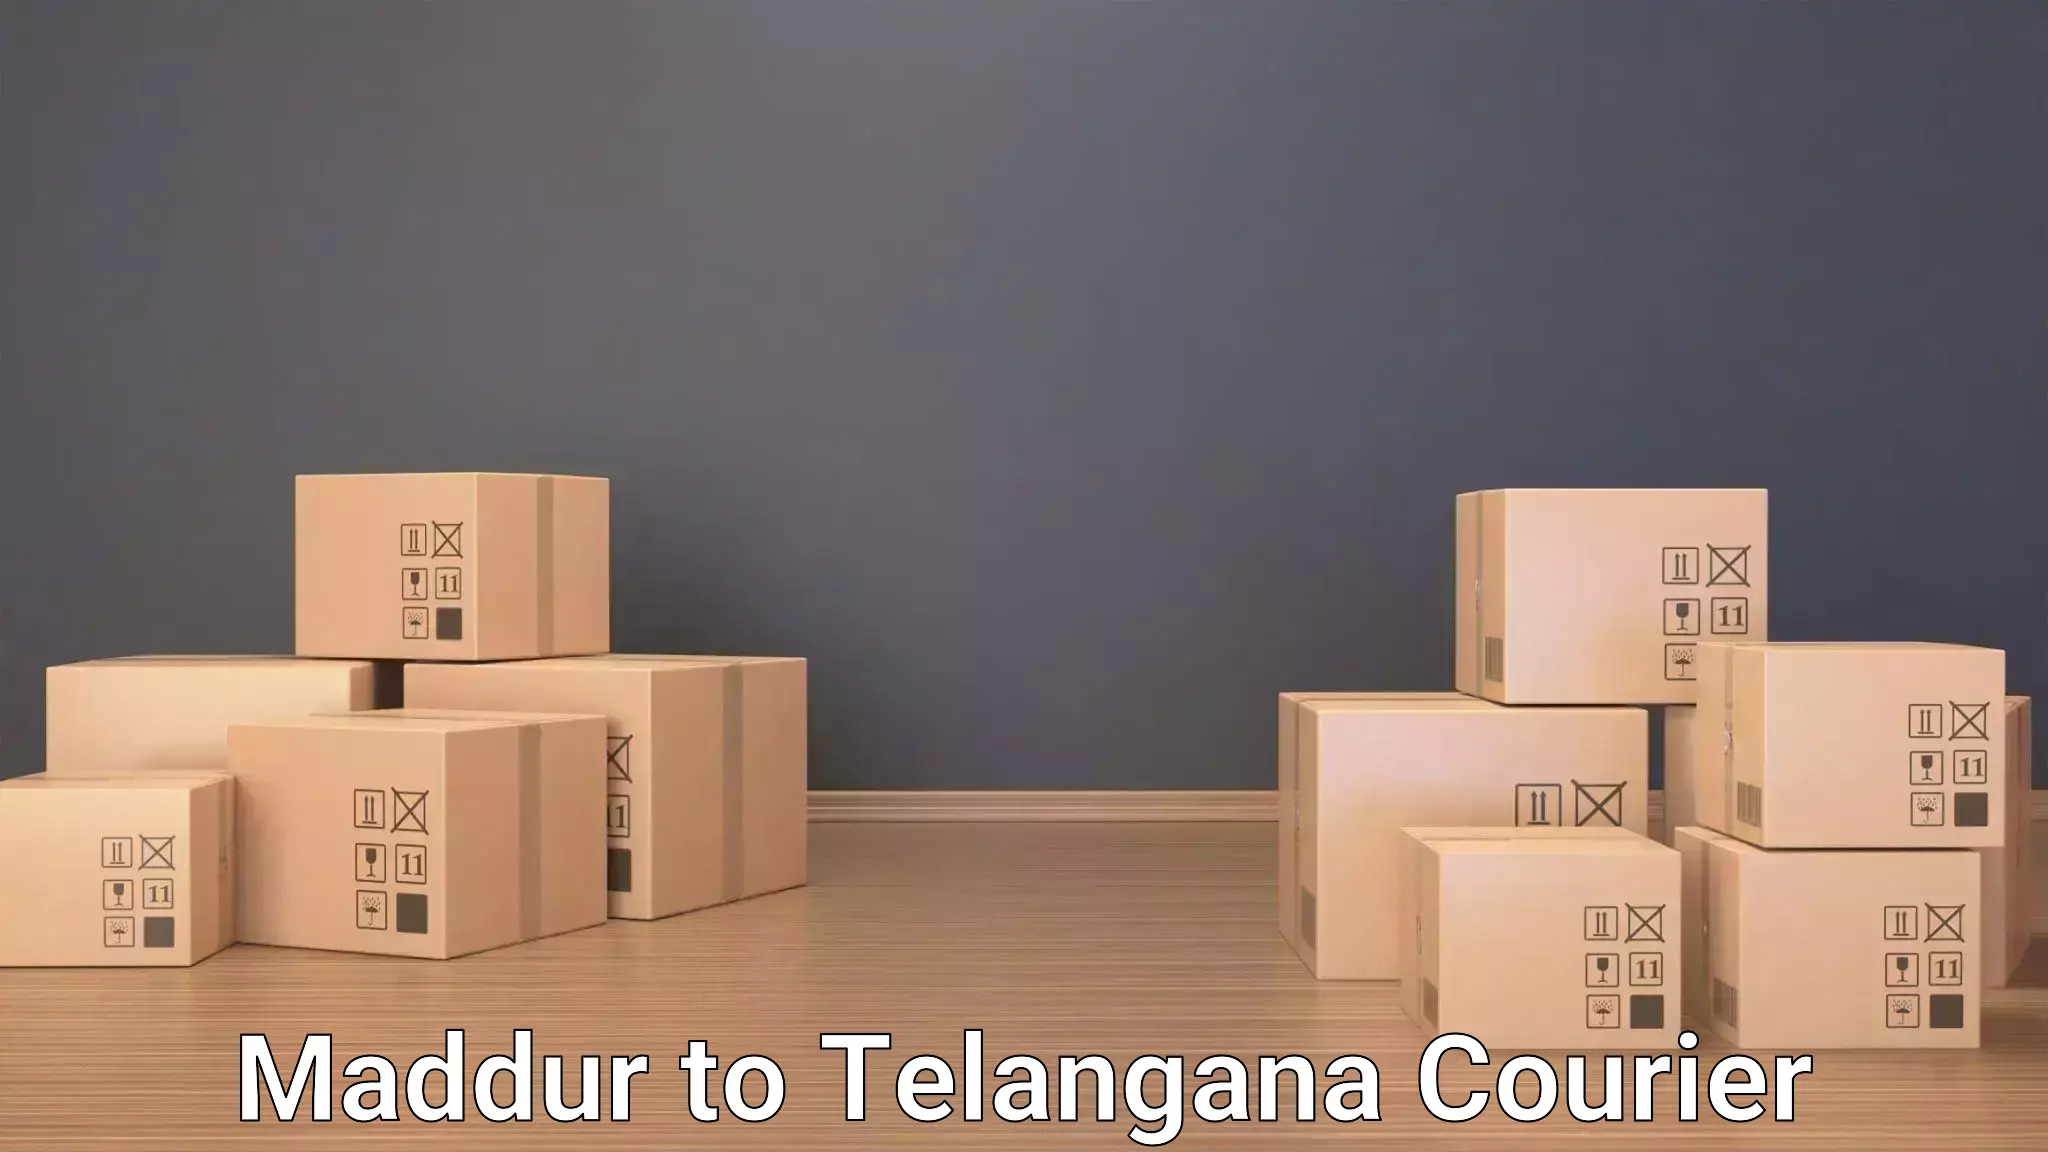 Luggage transfer service Maddur to Secunderabad